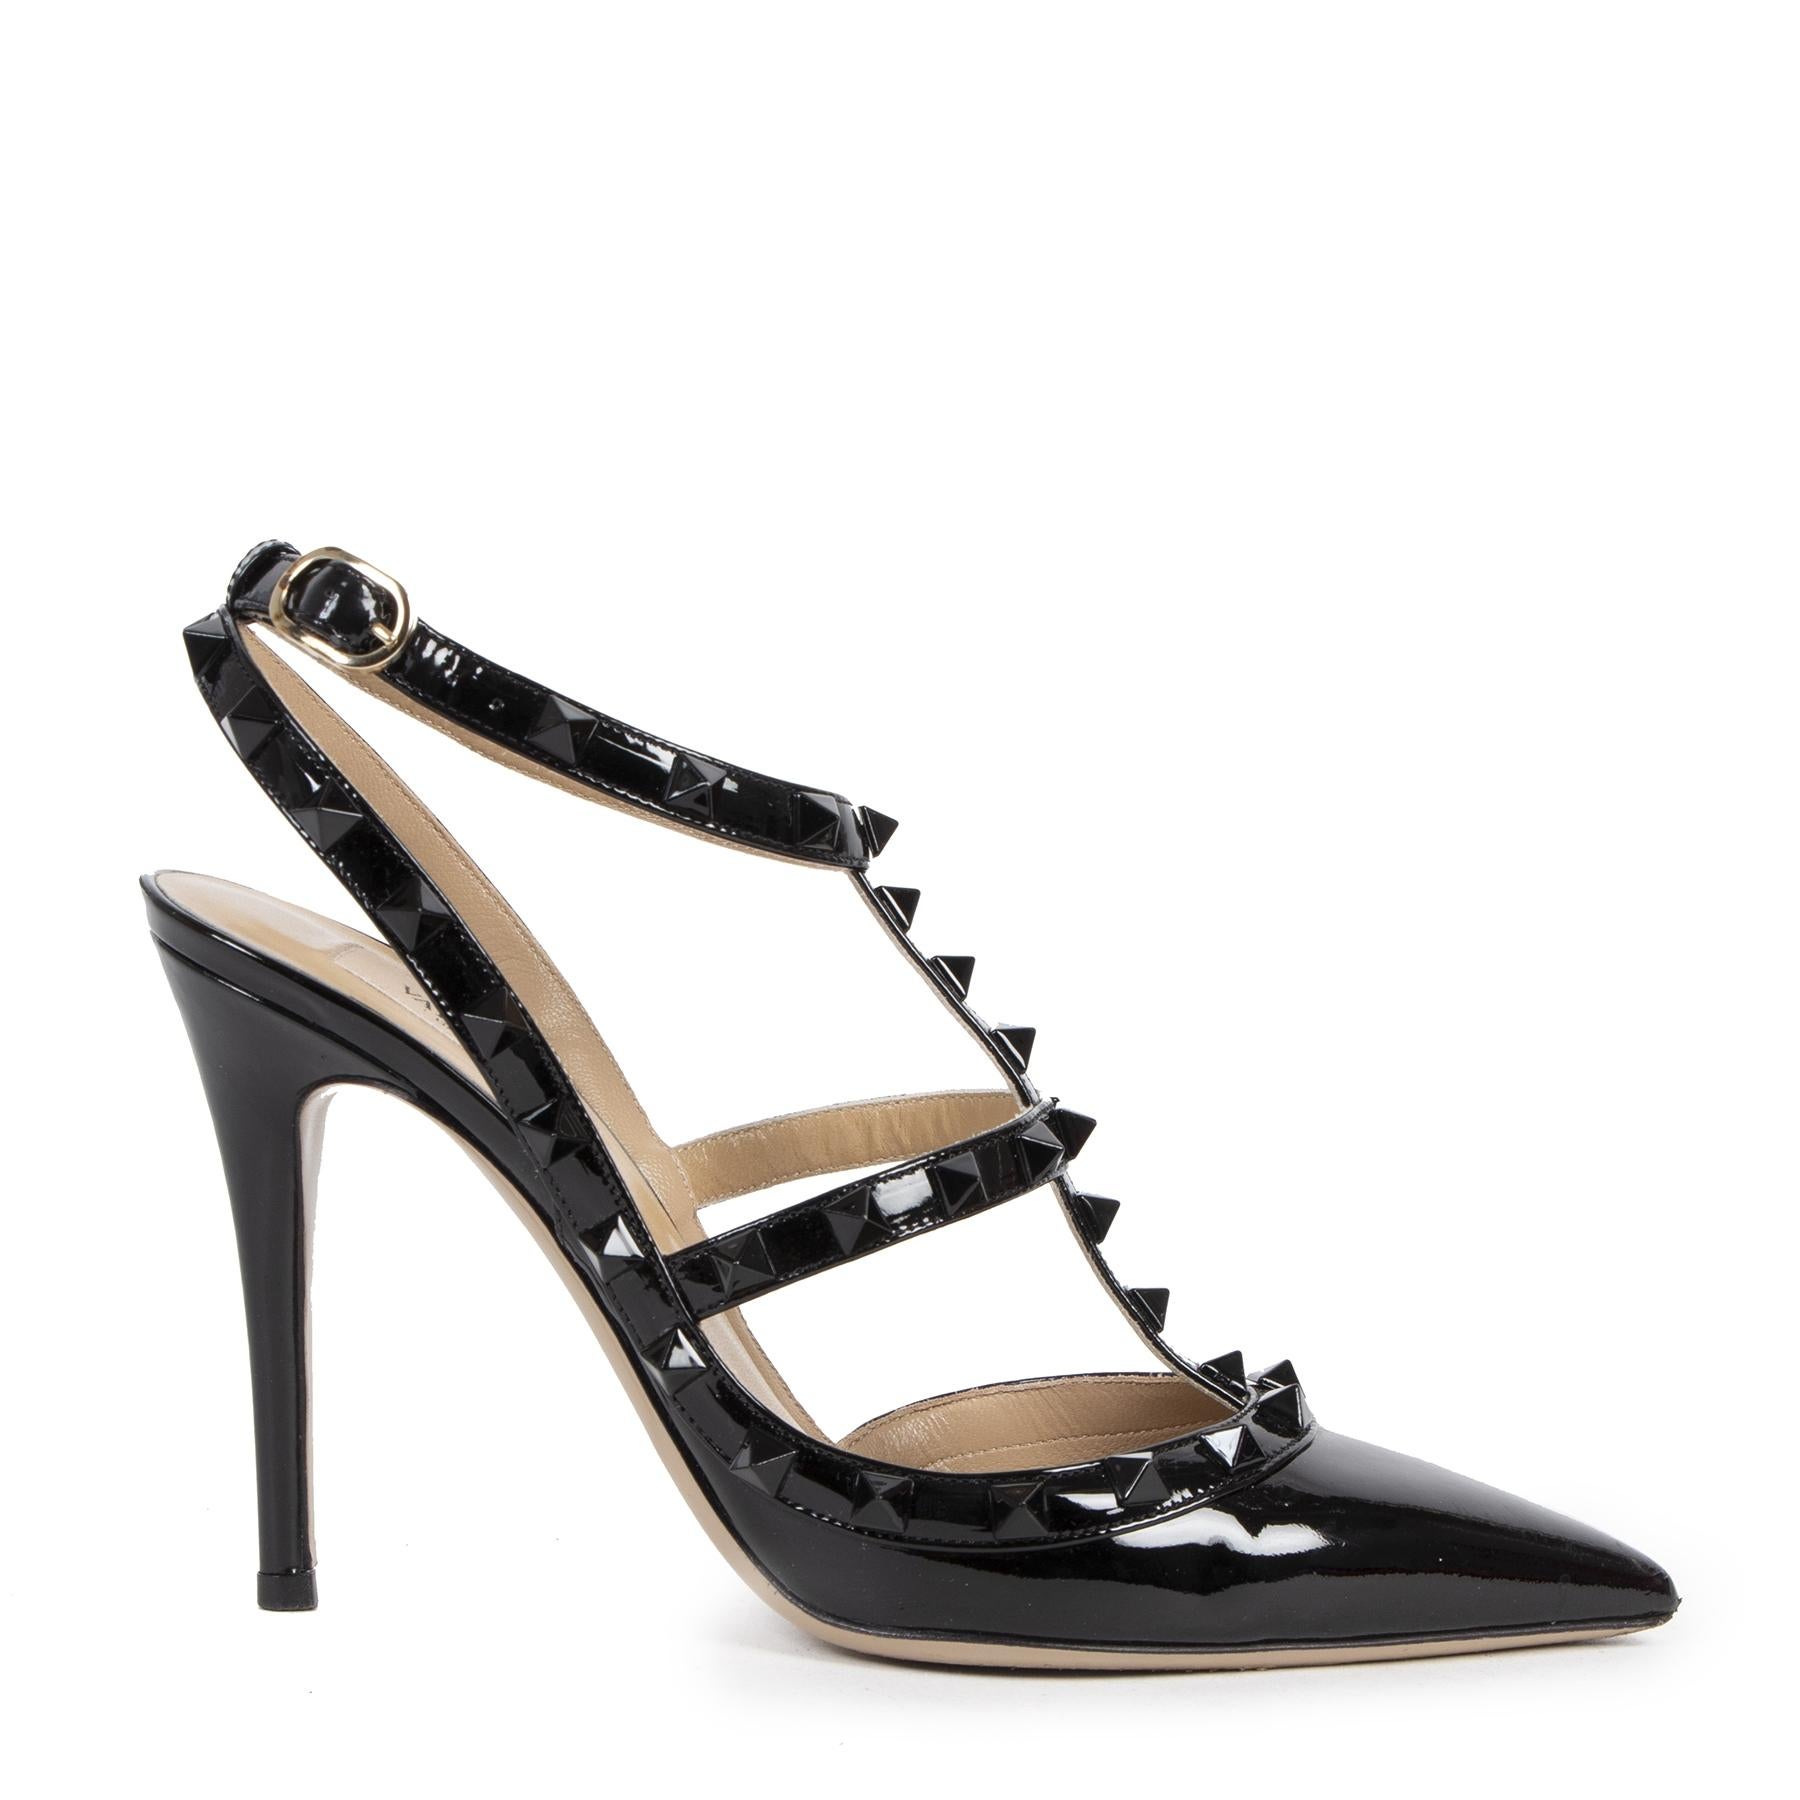 Preloved condition

Valentino Patent Leather Rockstud Heels - Size 37

A black pair of heels will never go out of style and these Valentino heels are the perfect timeless pick! These Valentino Rockstud heels are one of the most iconic shoes out